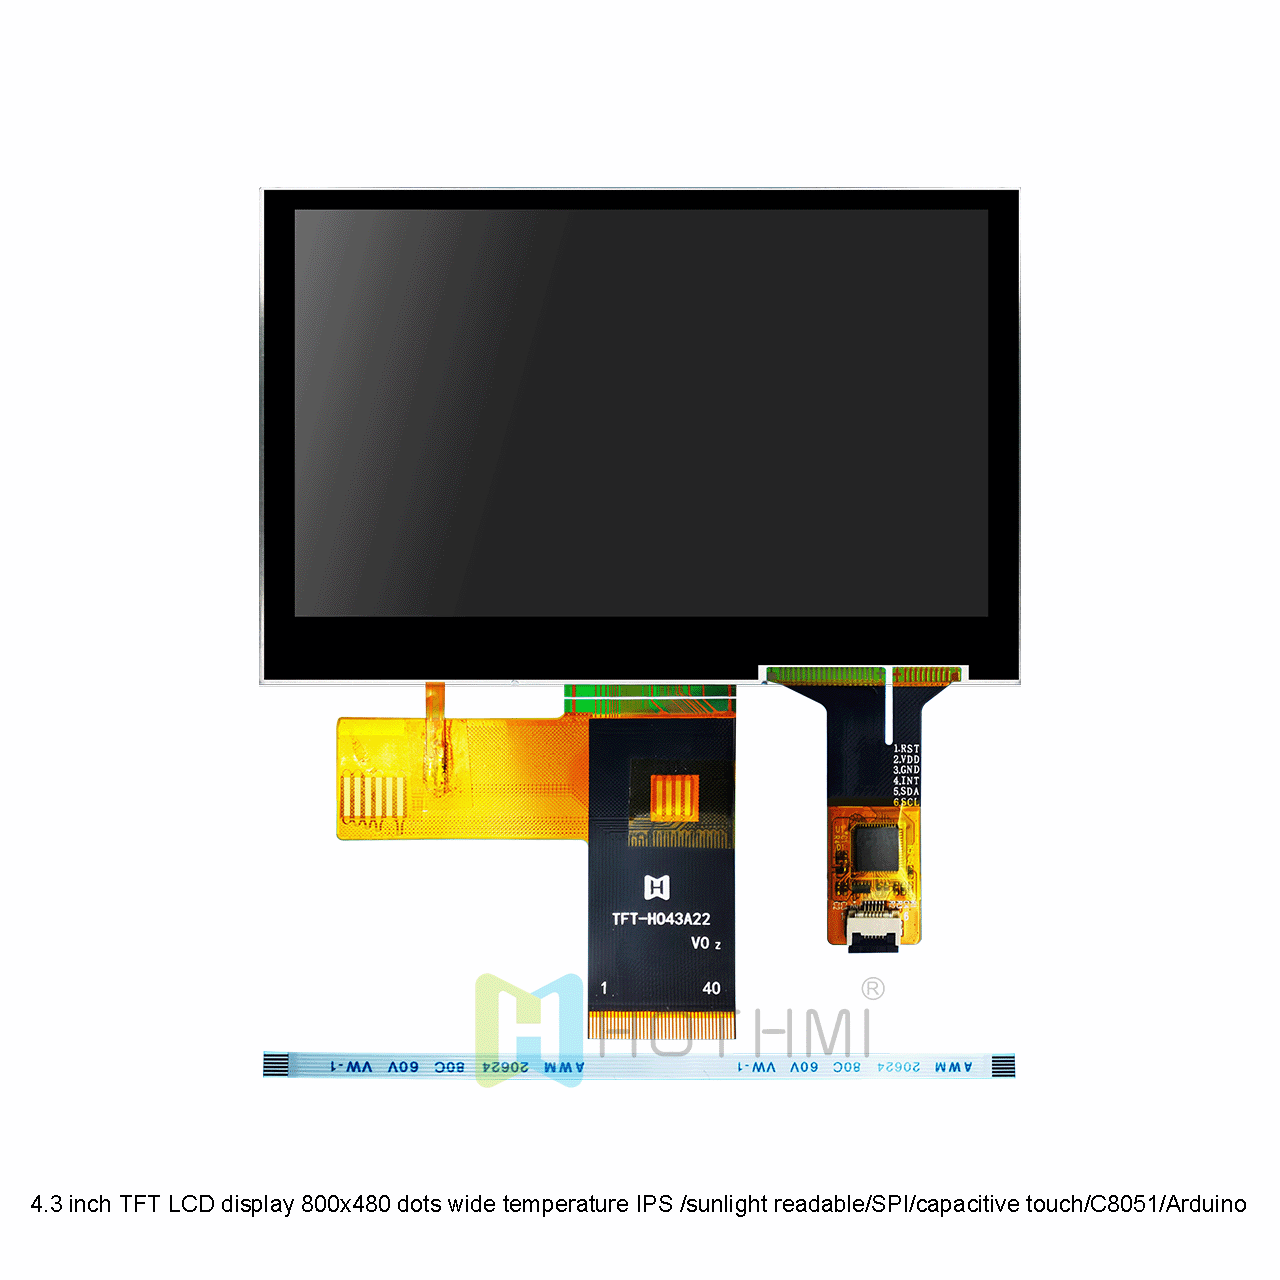 4.3 inch TFT LCD display 480x272 dots wide temperature IPS full viewing angle/sunlight readable/SPI interface/capacitive touch compatible with C8051/Arduino/STM32